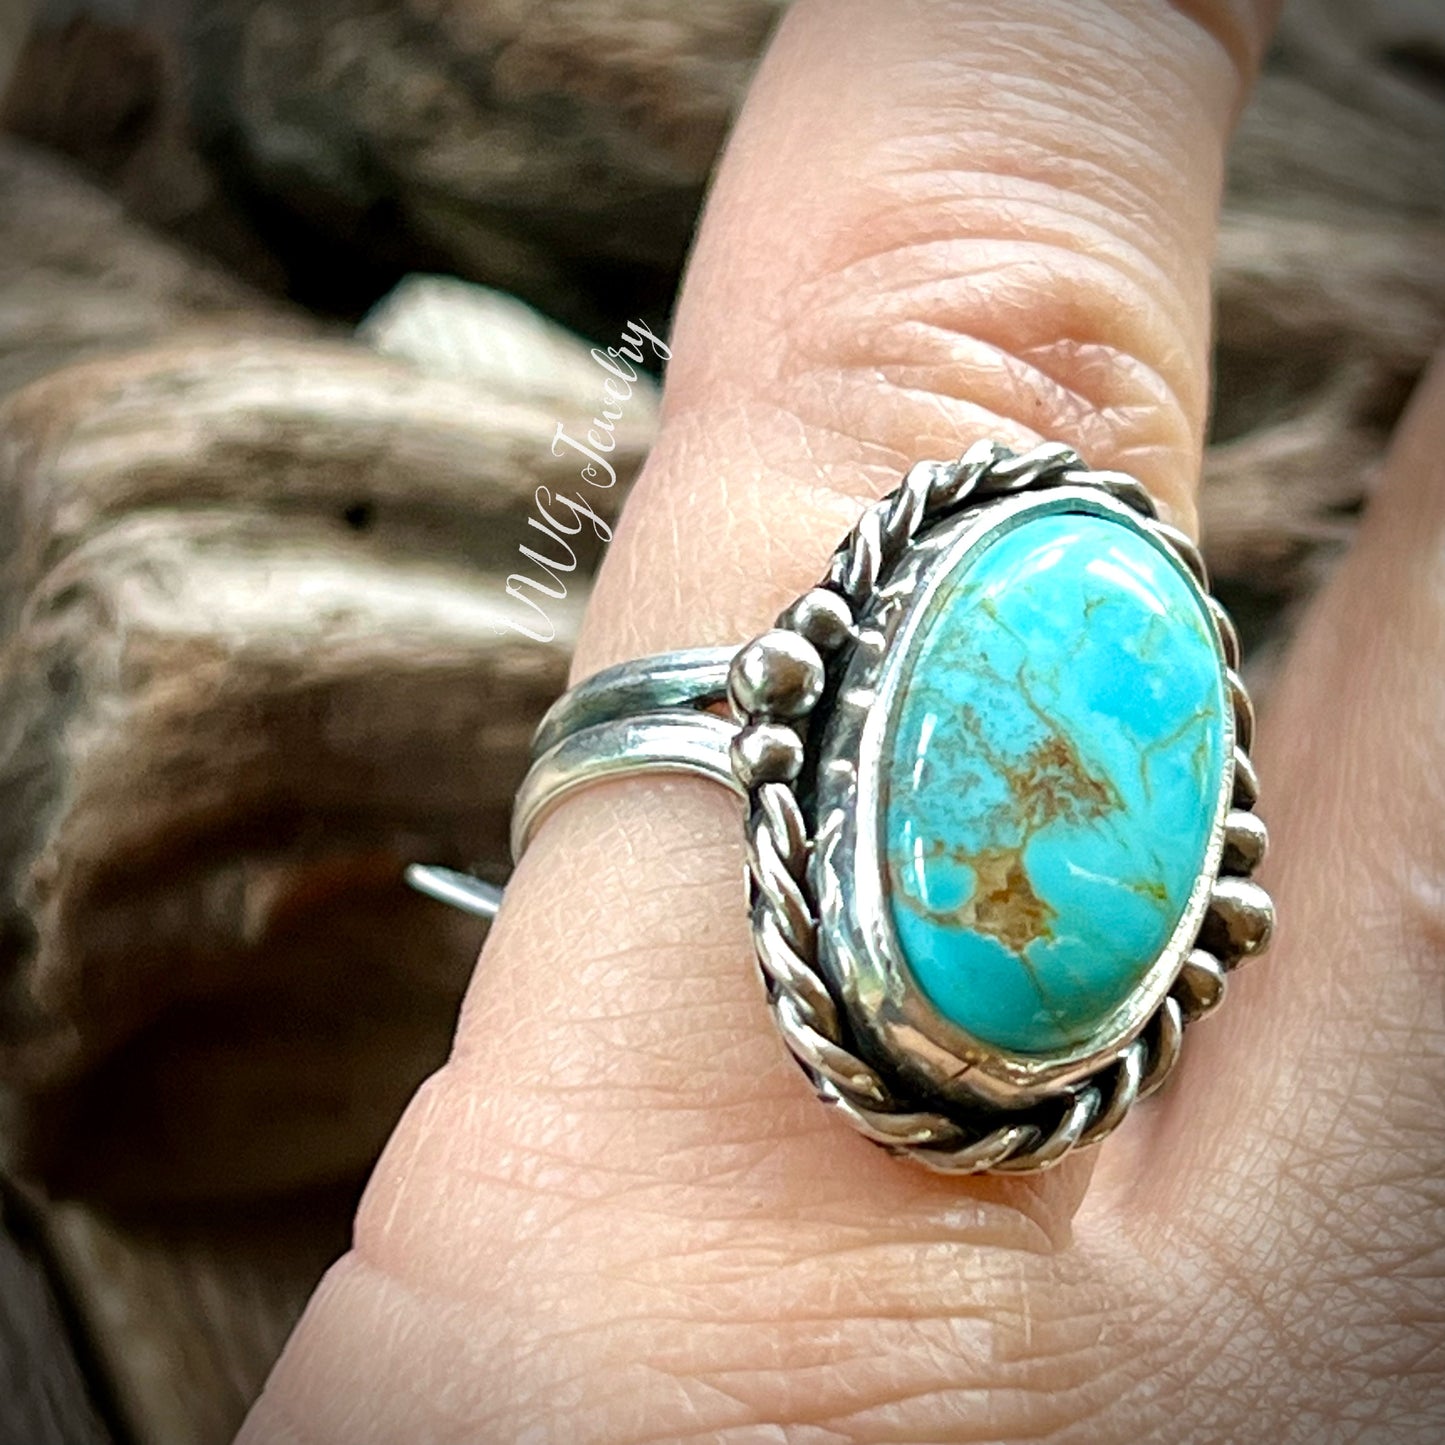 Kings Manassa Turquoise Sterling Silver Ring Size 6.5